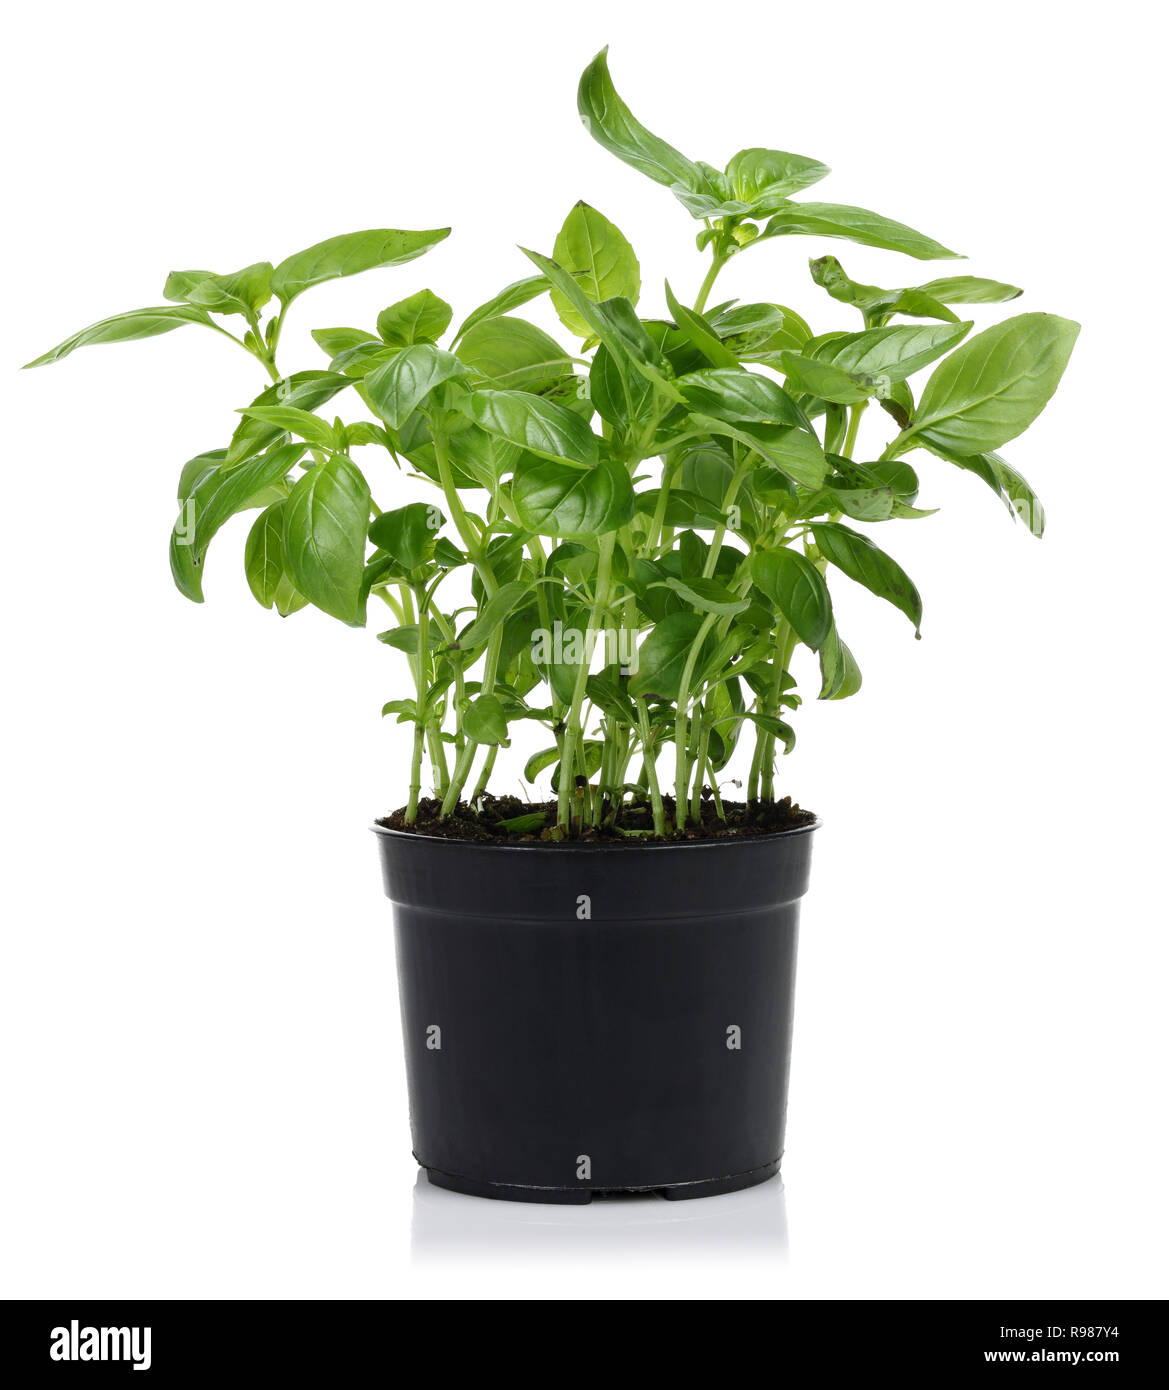 Green basil plant, in black pot isolated on white background Stock Photo